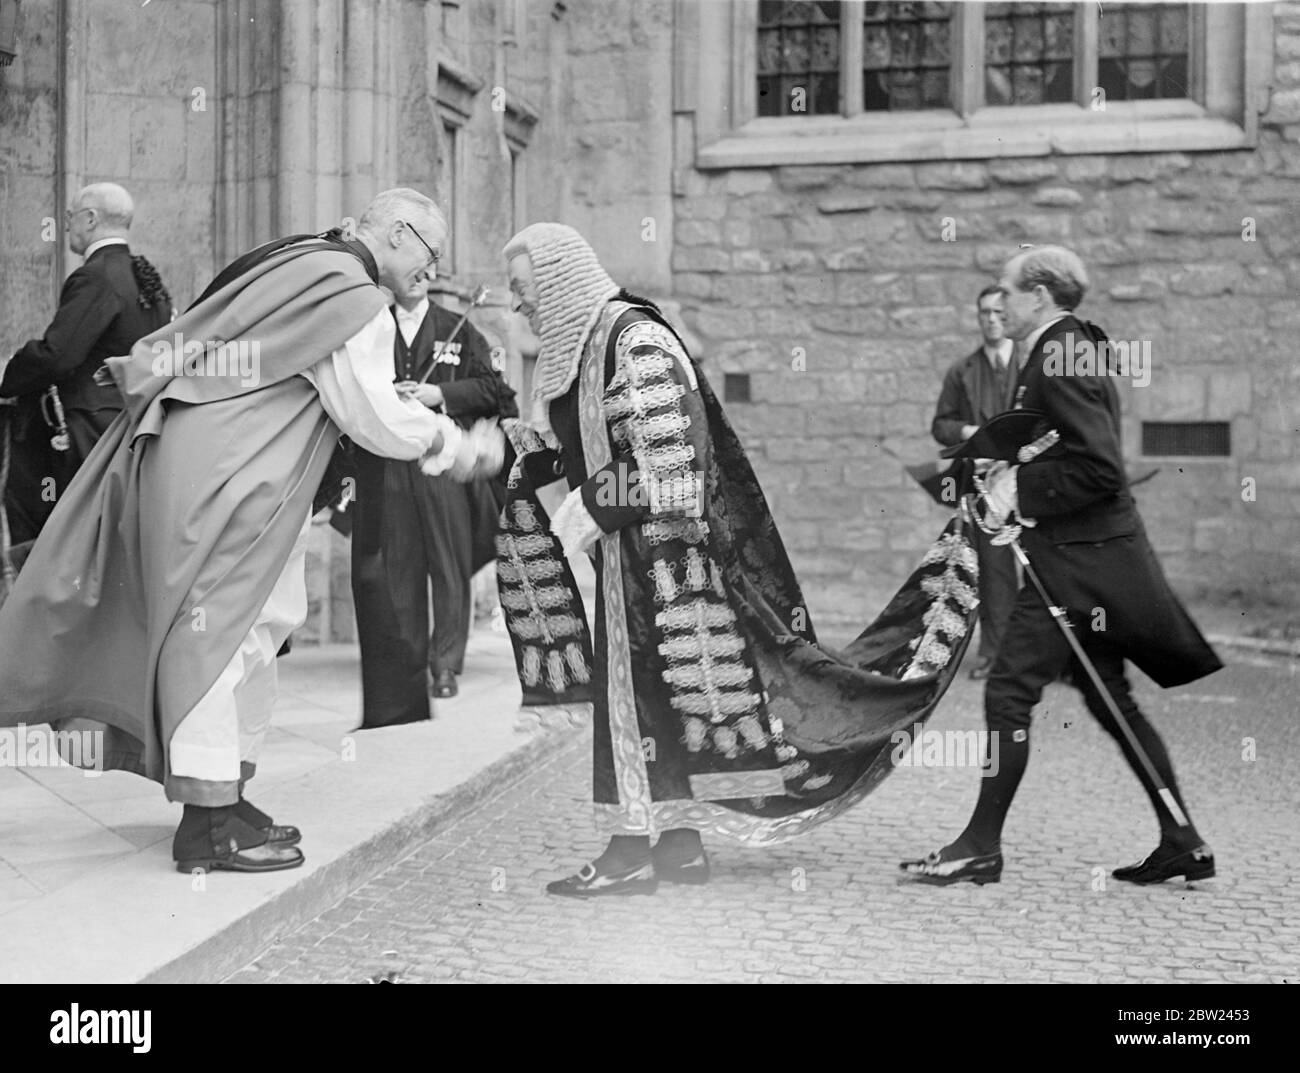 The Lord Chancellor, Lord Maugham, and his Majesty's judges, attend a special service in Westminster Abbey on the occasion of the reopening of the Law Courts after the long vacation. Photo shows: The Lord Chancellor, Lord Maugham, being received by the Dean of Westminster, the Rt Rev P F Delacour de Labilliere, at Westminster Abbey. 12 October 1938 Stock Photo